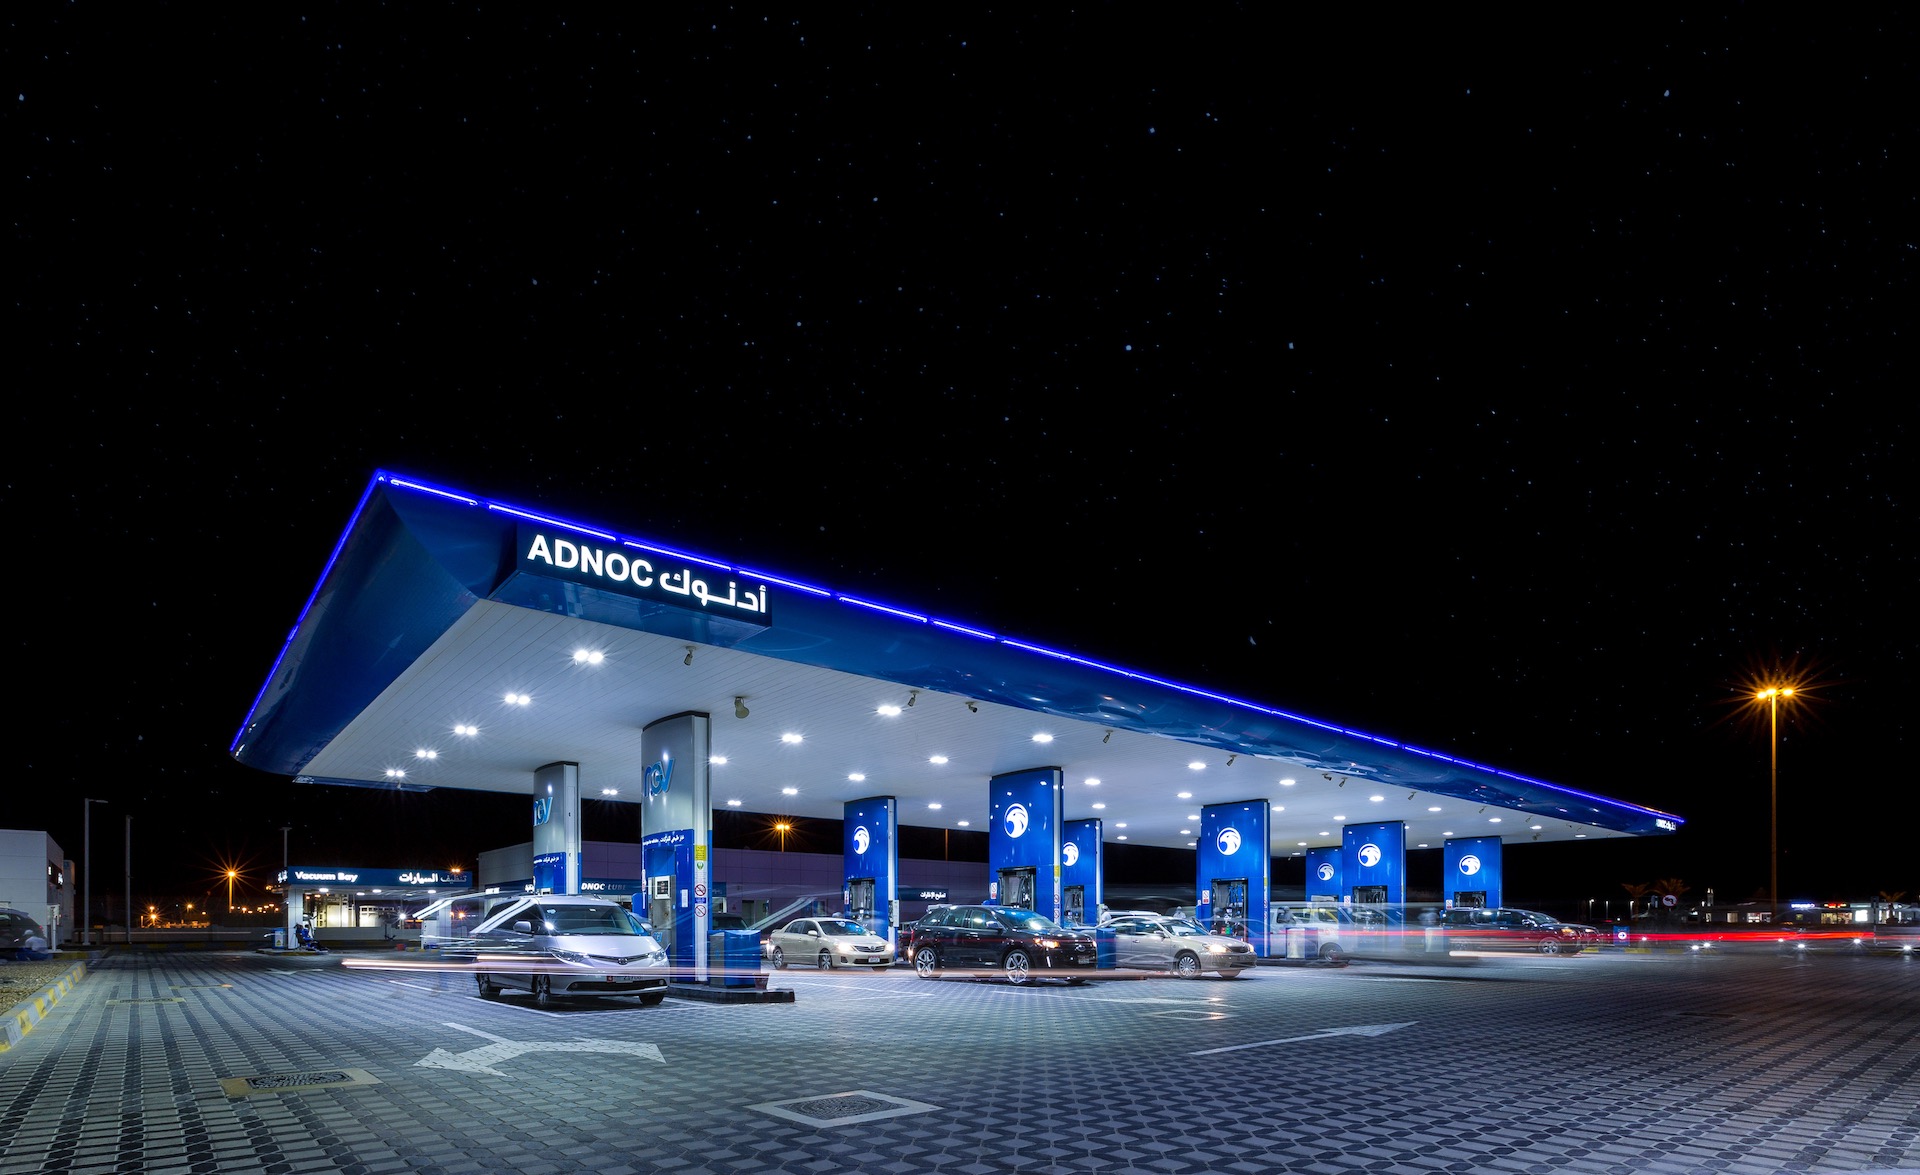 ADNOC Distribution approves a dividend of AED1.28 billion for H2 2021